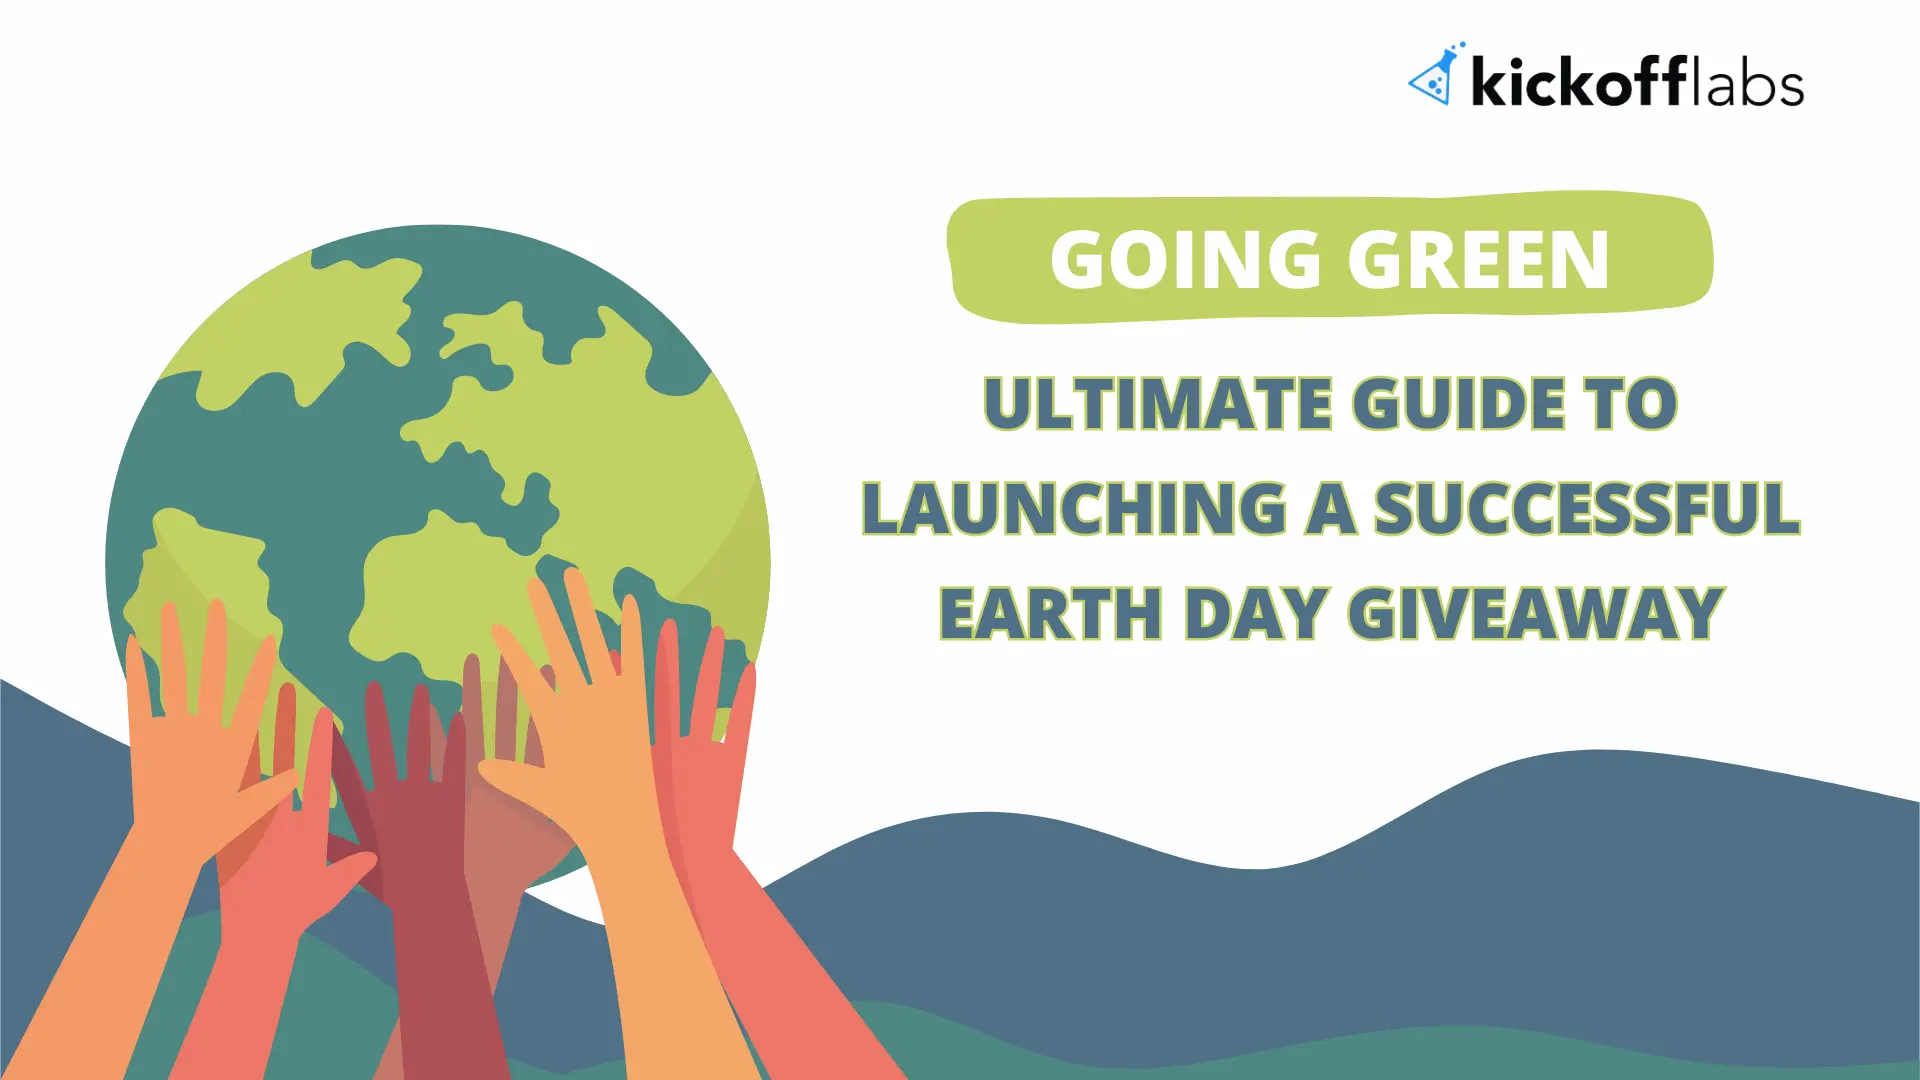 Earth Day resources to make your giveaway a success